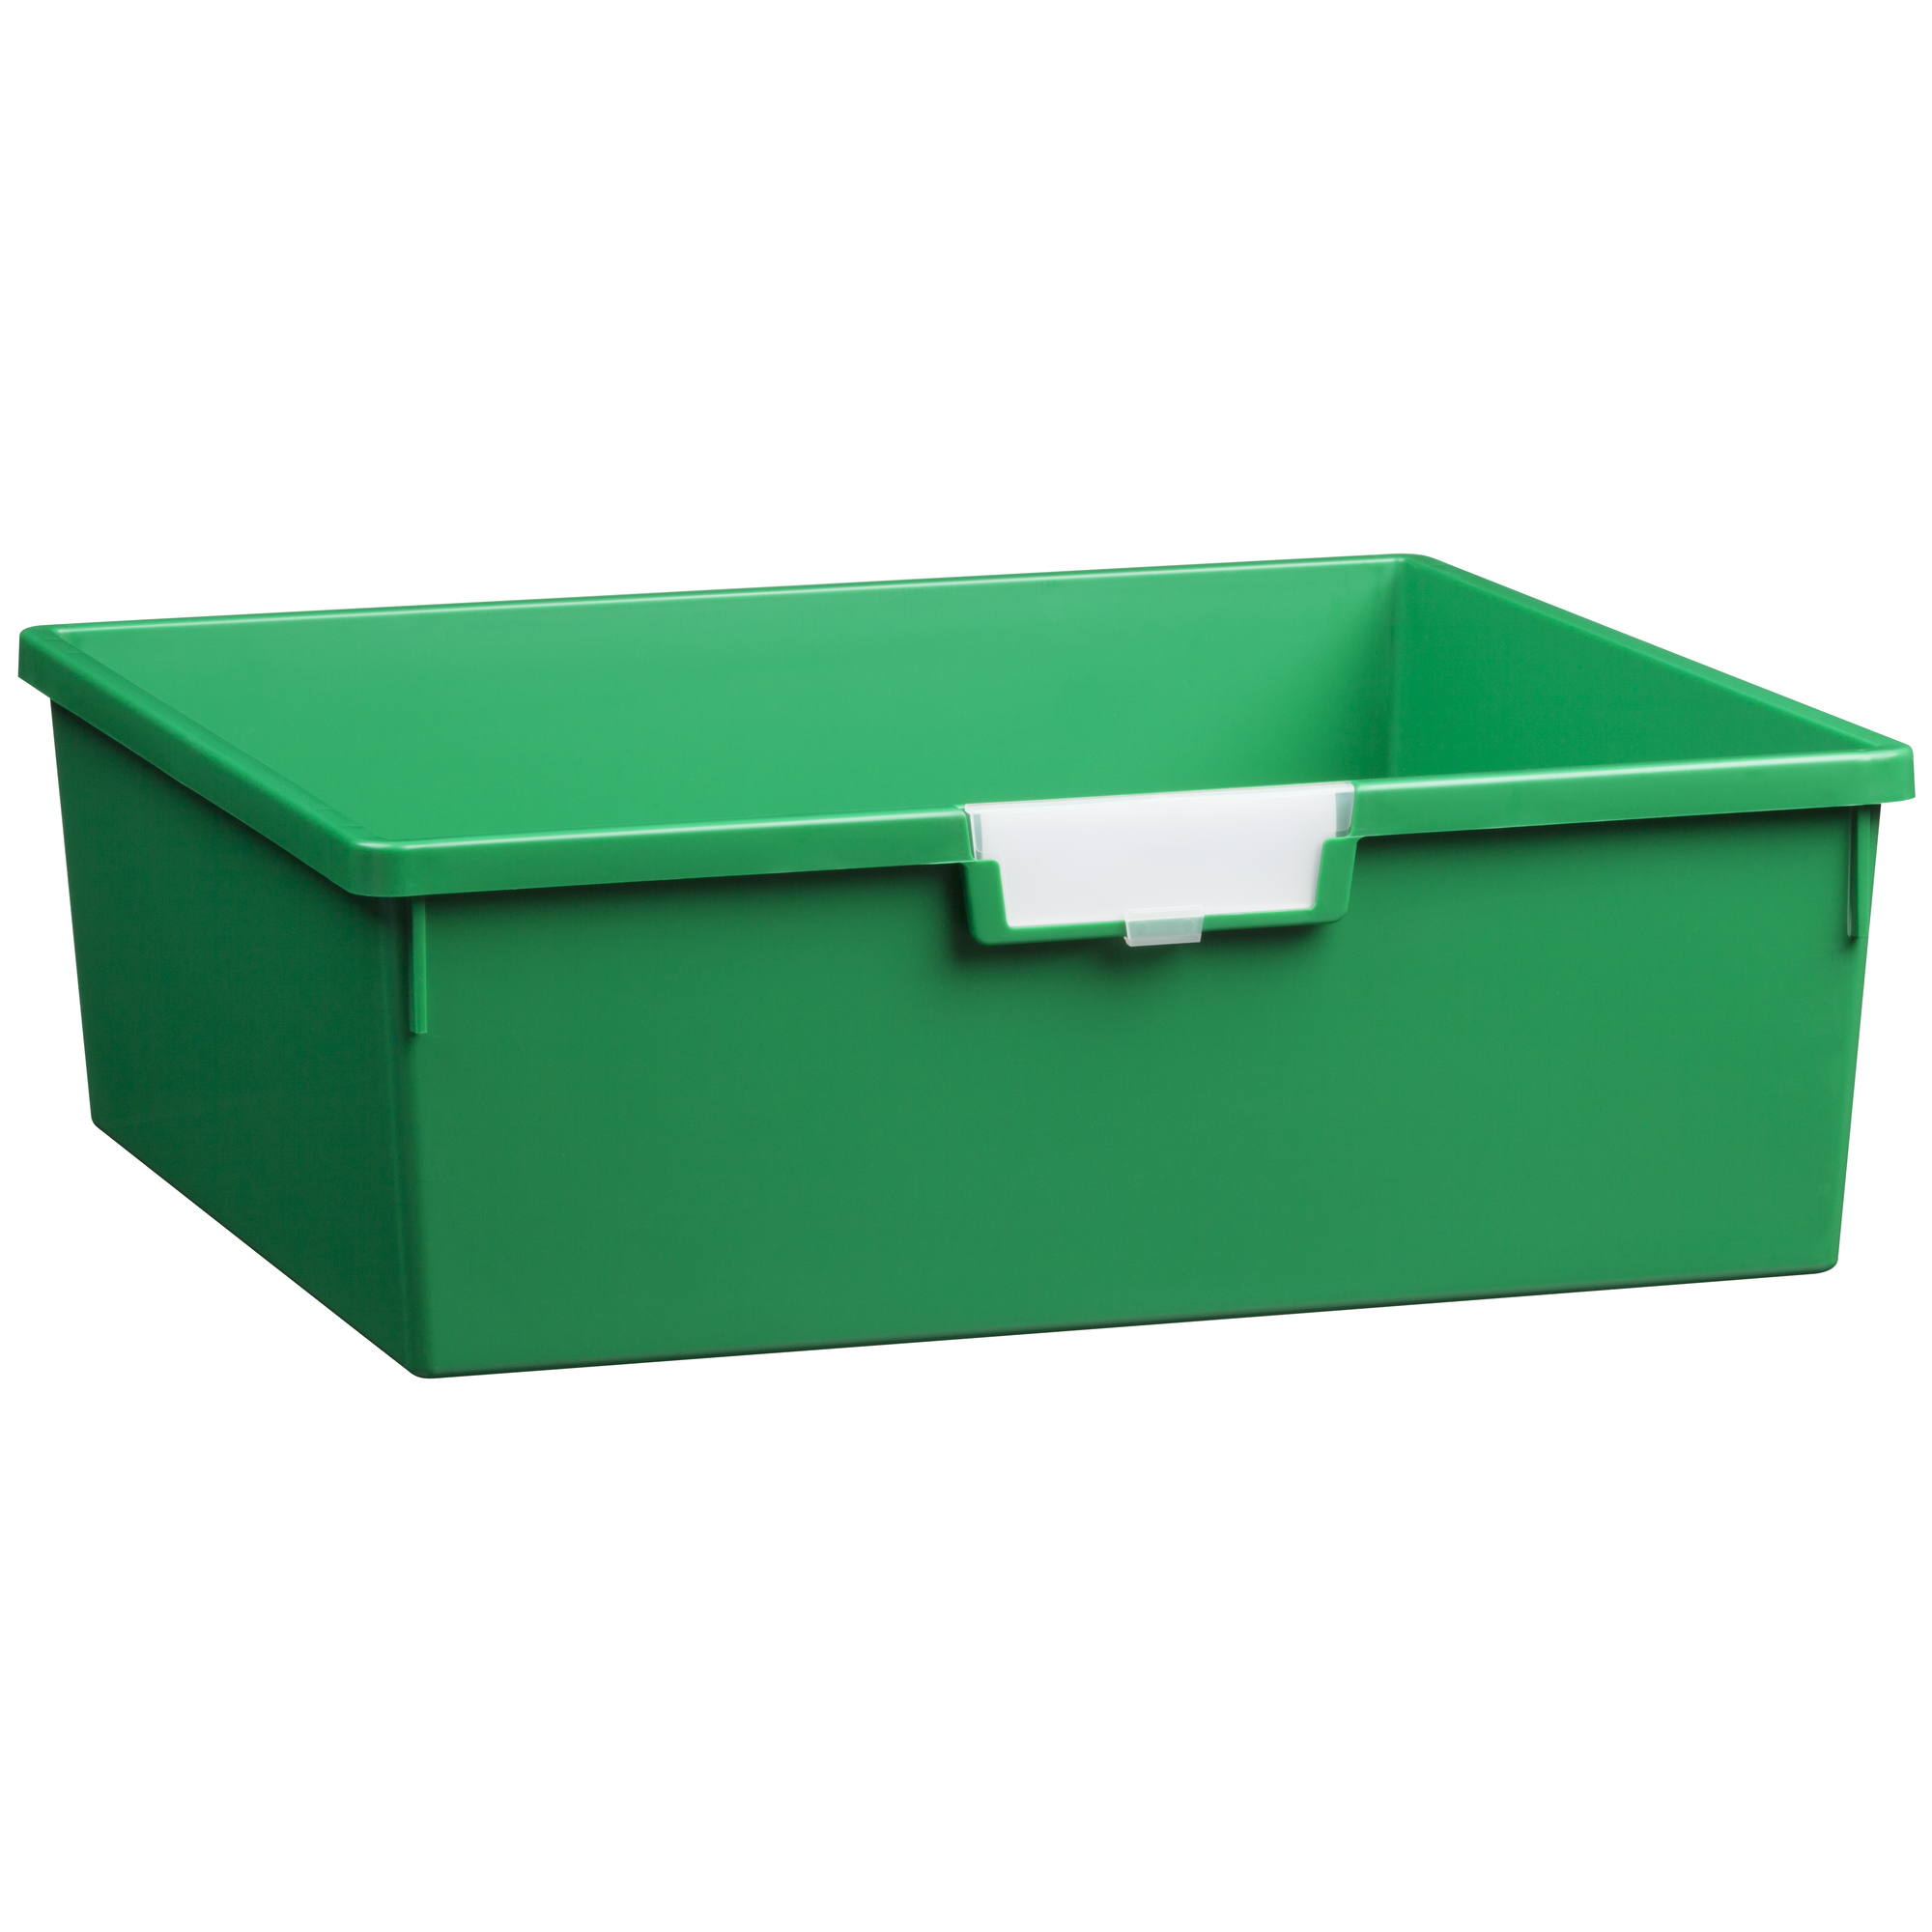 Certwood StorWerks, Wide Line 6Inch Tray in Primary Green-1PK, Included (qty.) 1, Material Plastic, Height 6 in, Model CE1958PG1